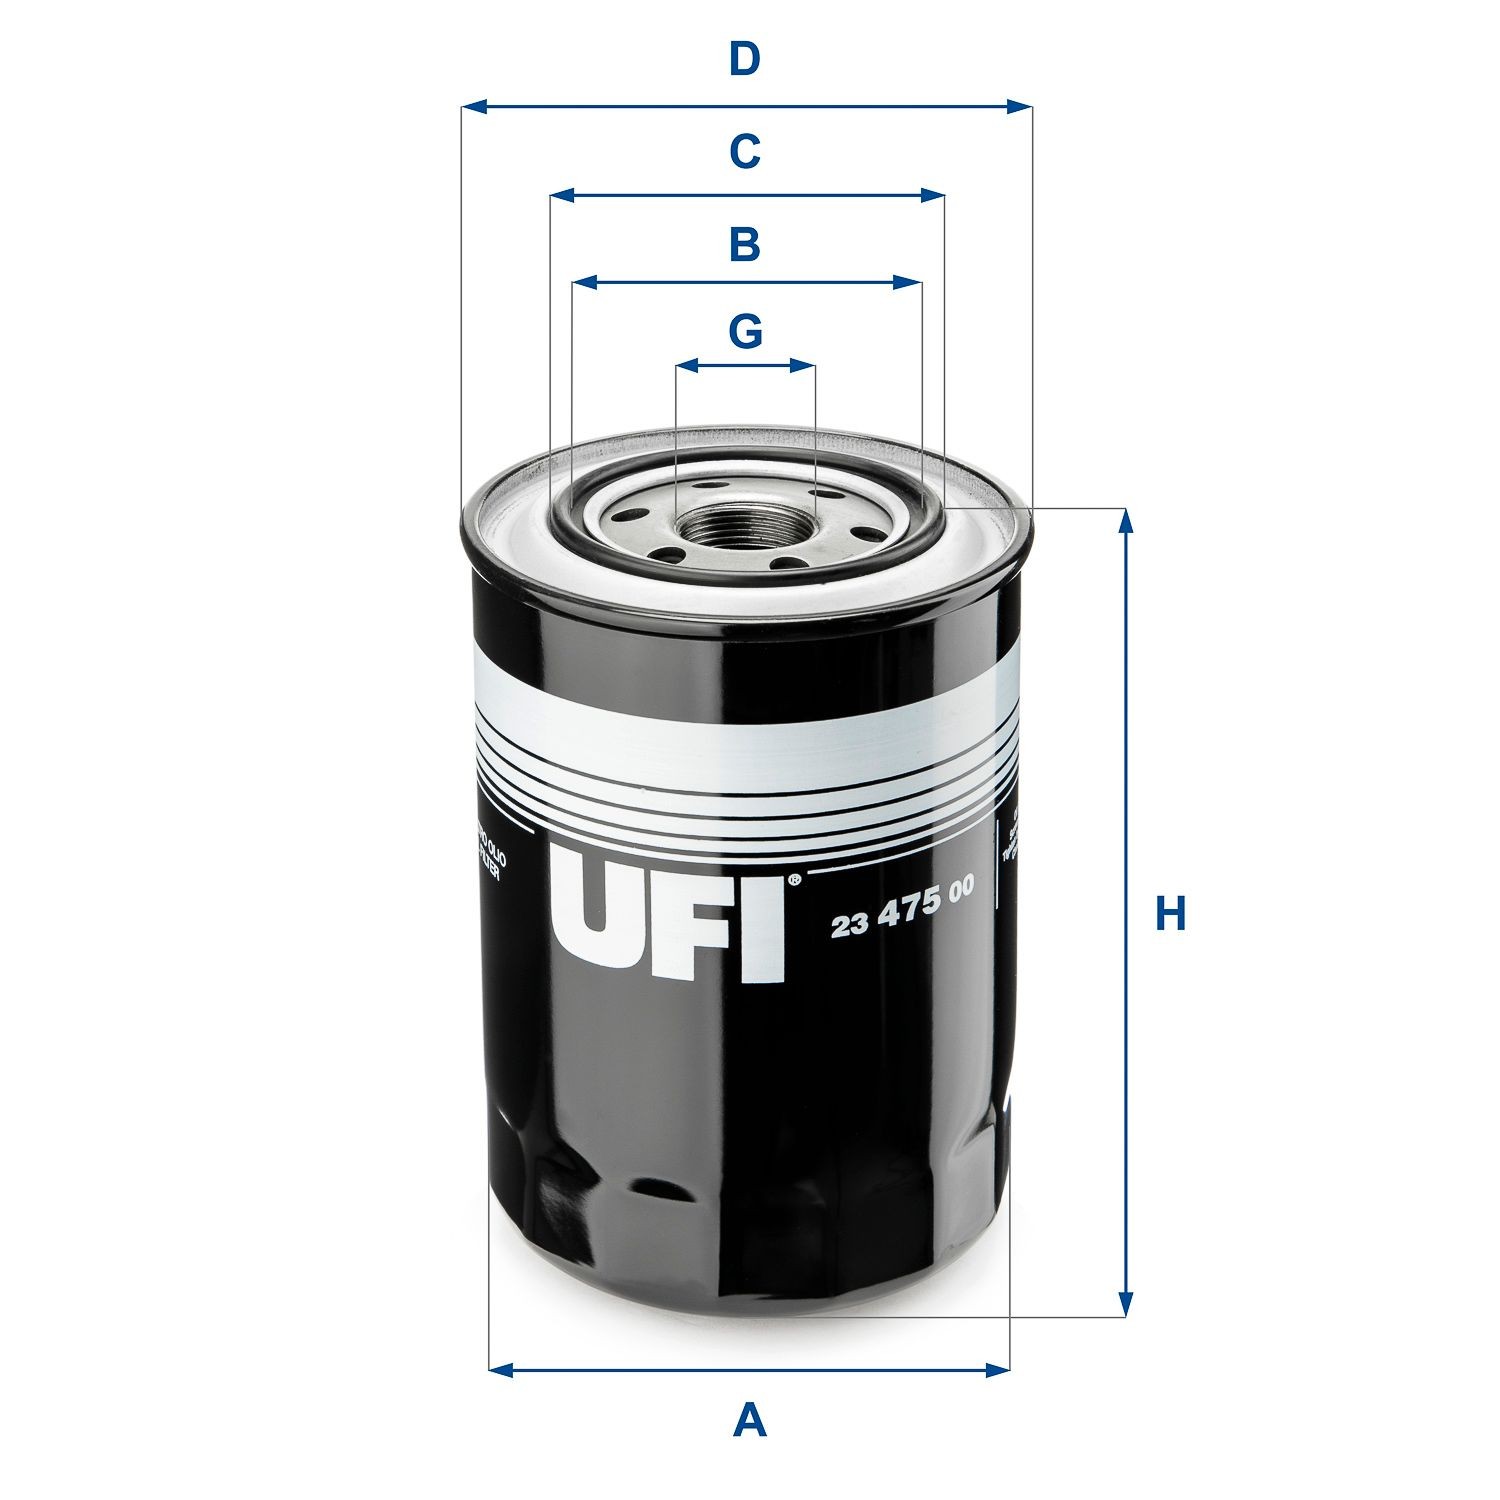 UFI 23.475.00 Oil filter MITSUBISHI experience and price